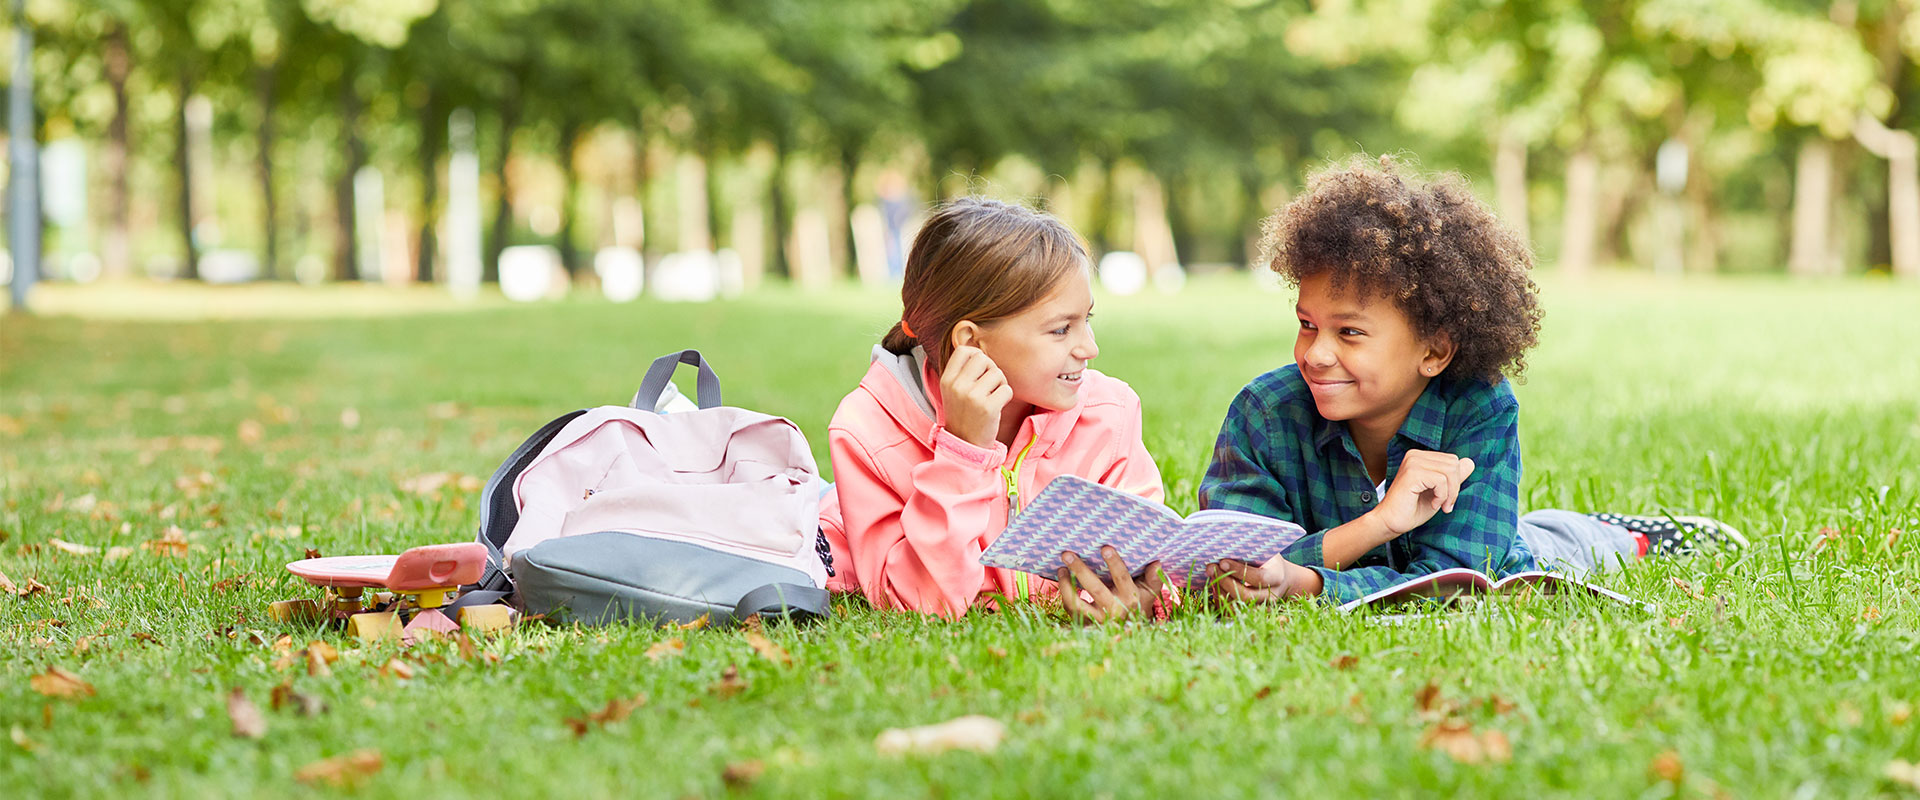 7 Reasons to Keep Your Child learning This Summer 